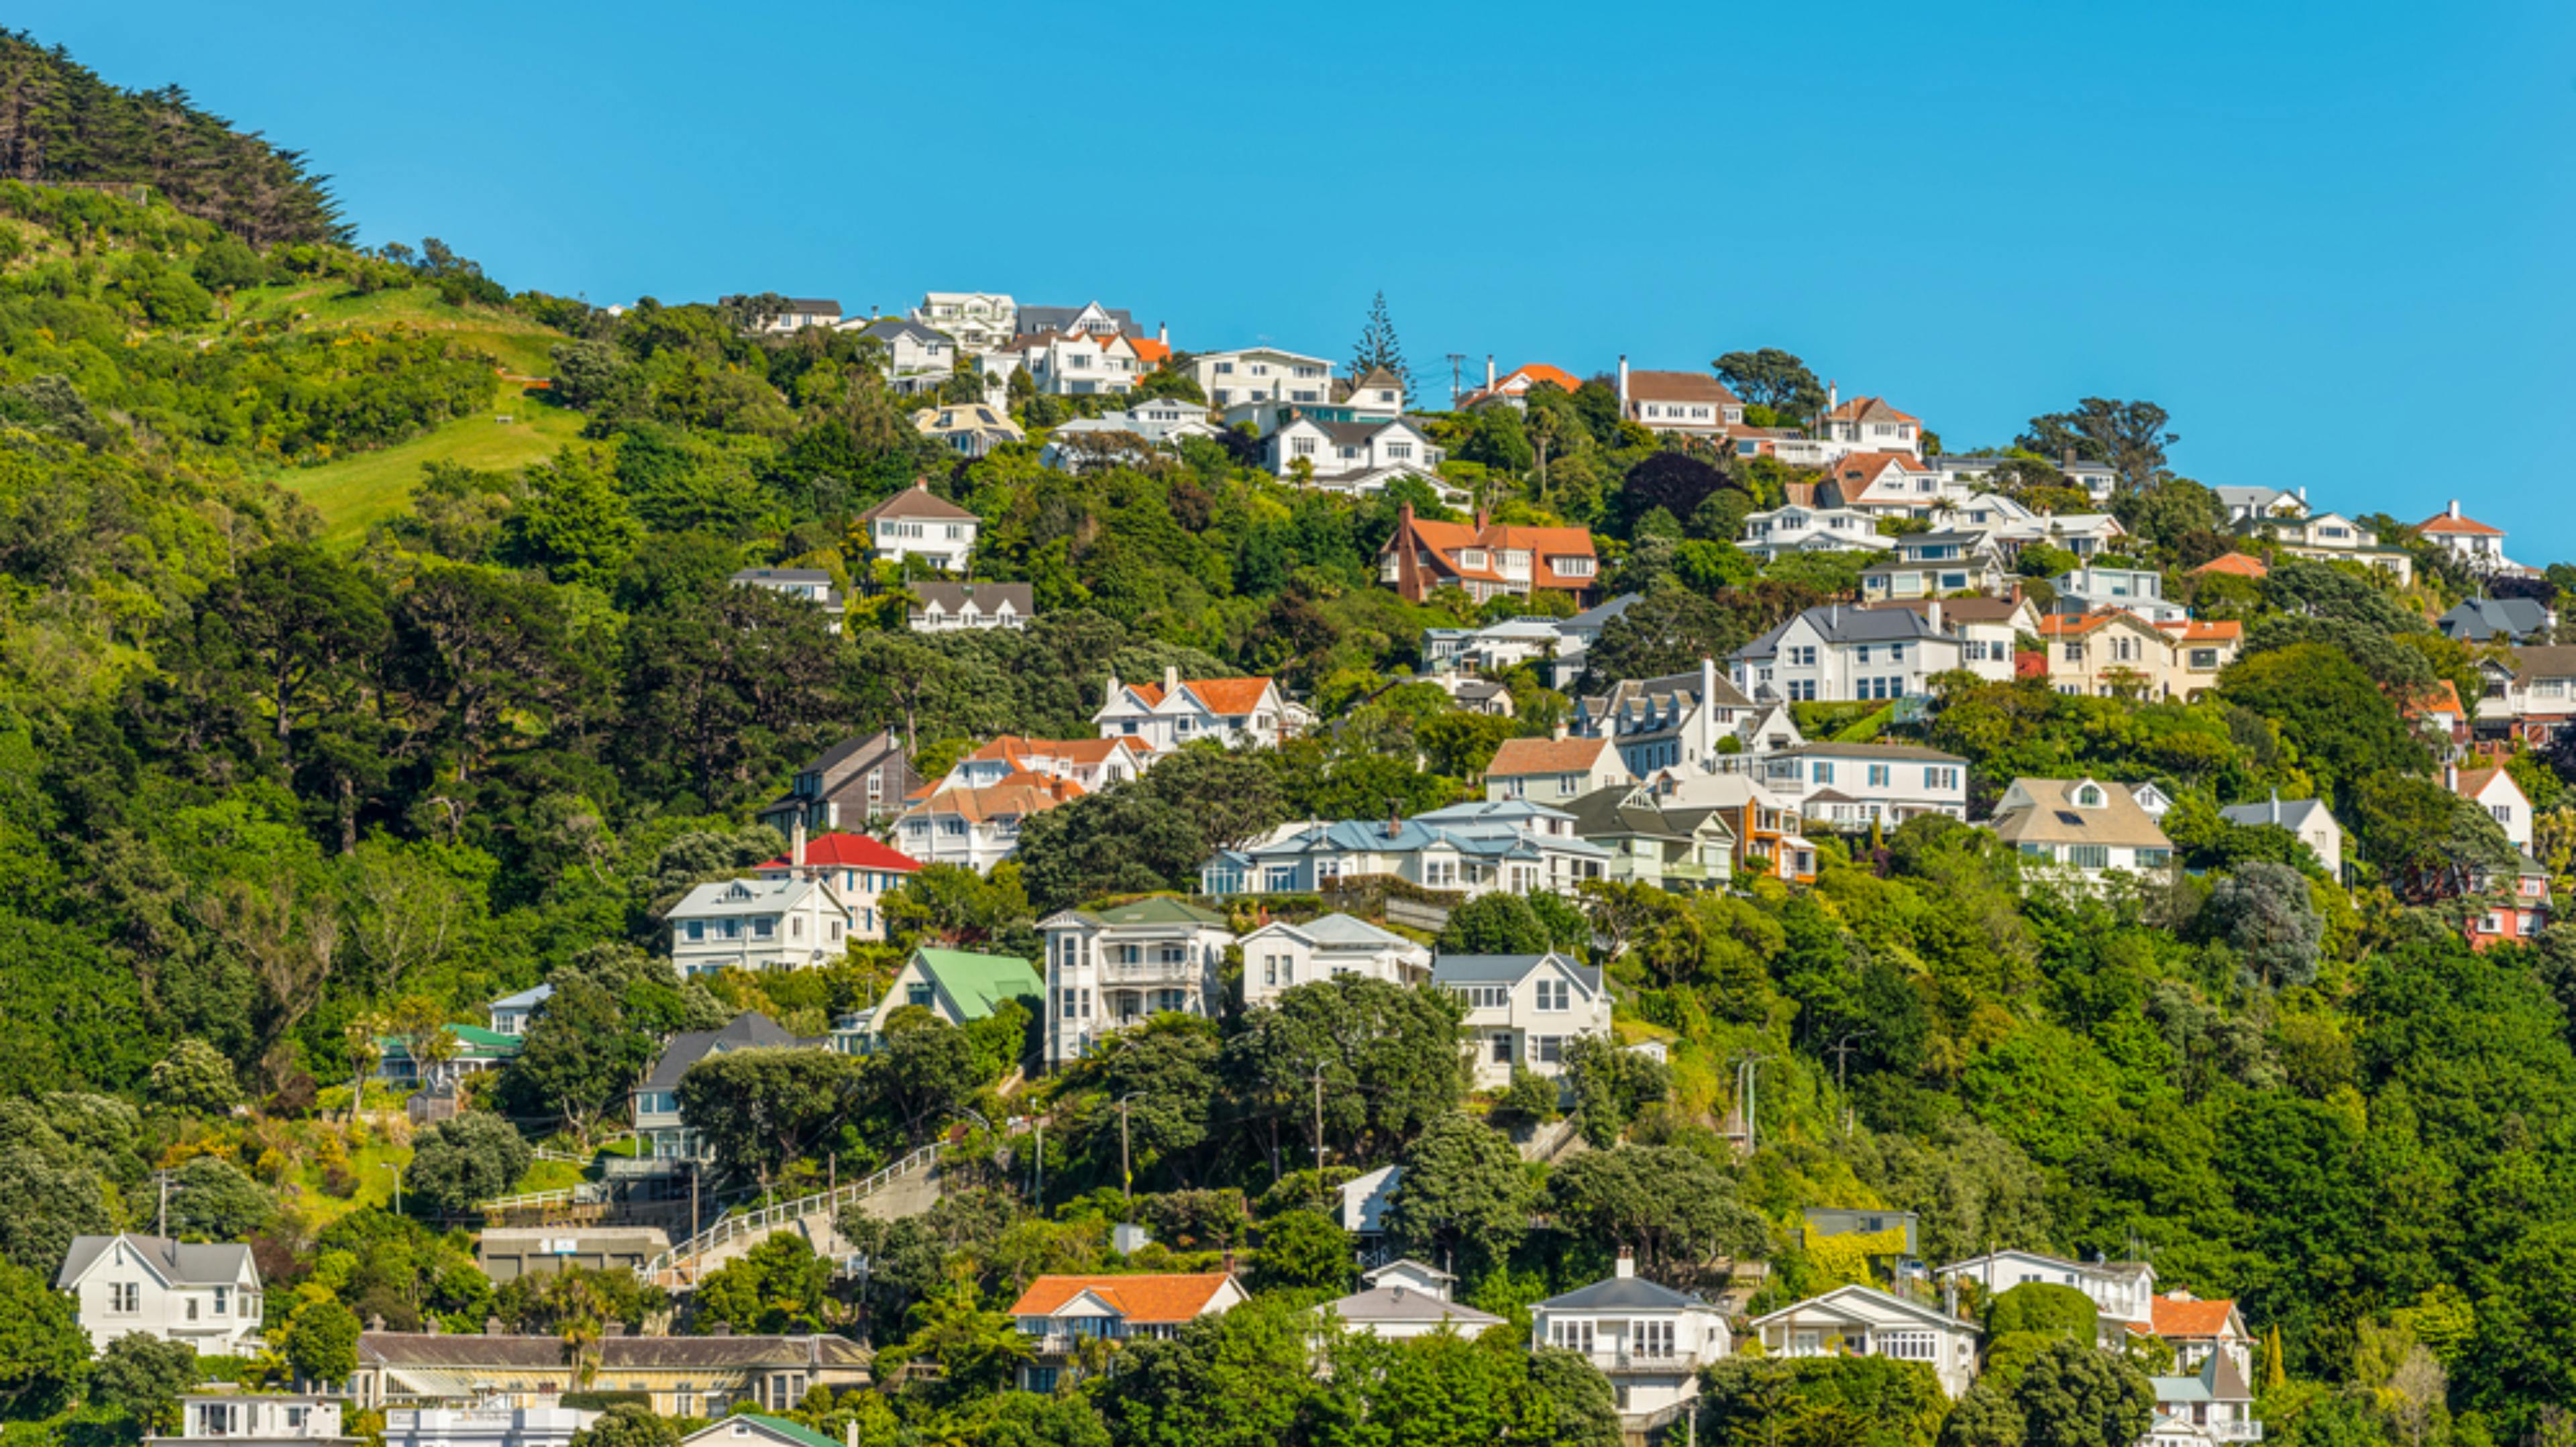 Asking Price For Provincial Homes Hits $500k, Auckland Down 0.7pc